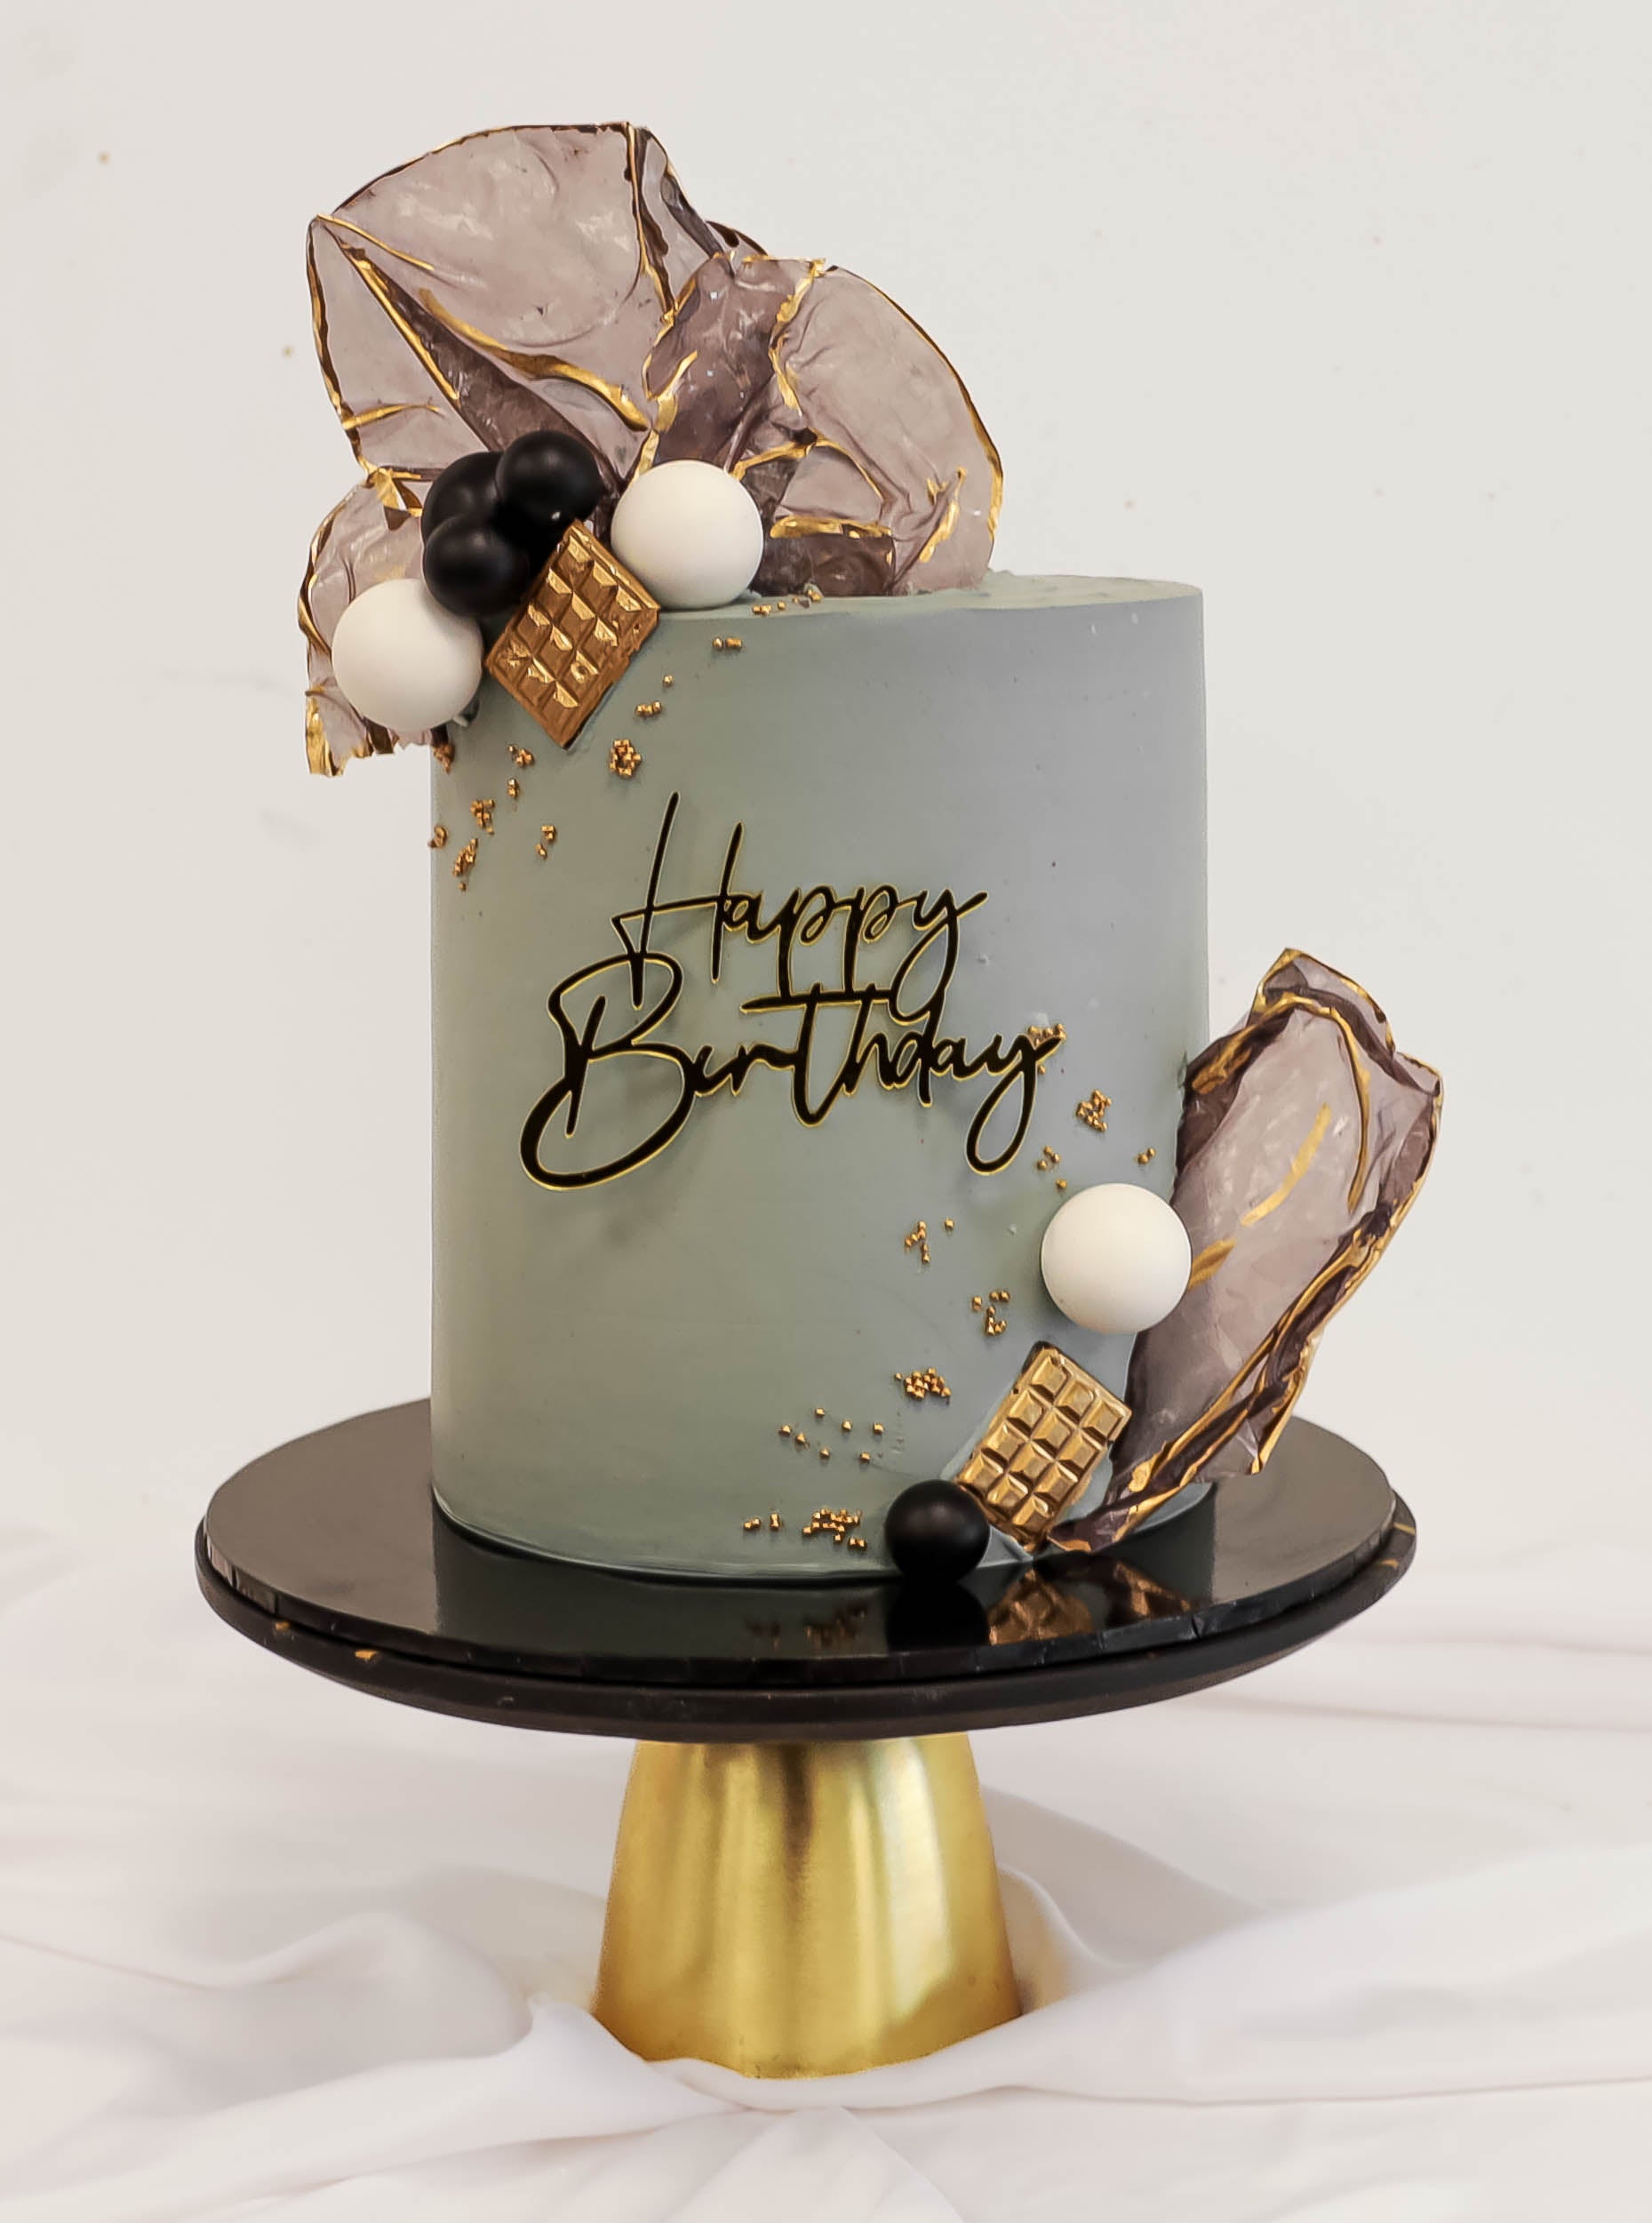 Cake Delivery London | FREE Delivery & Gift